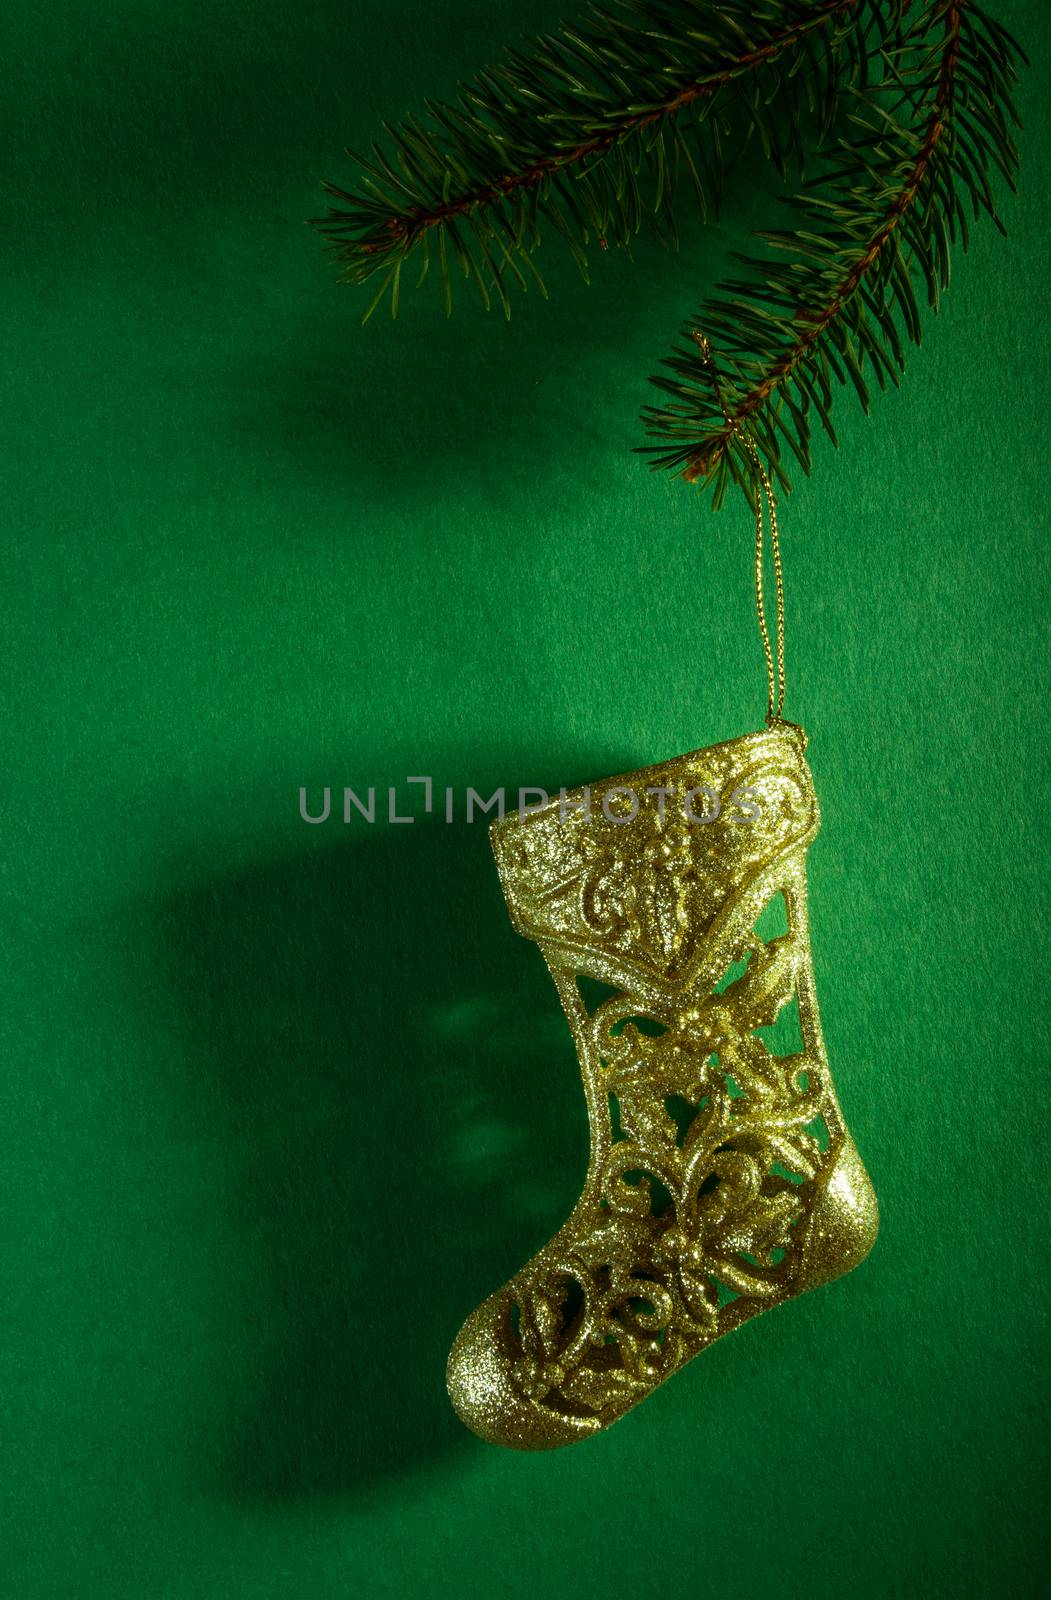 Christmas stocking: golden toy sock on green background